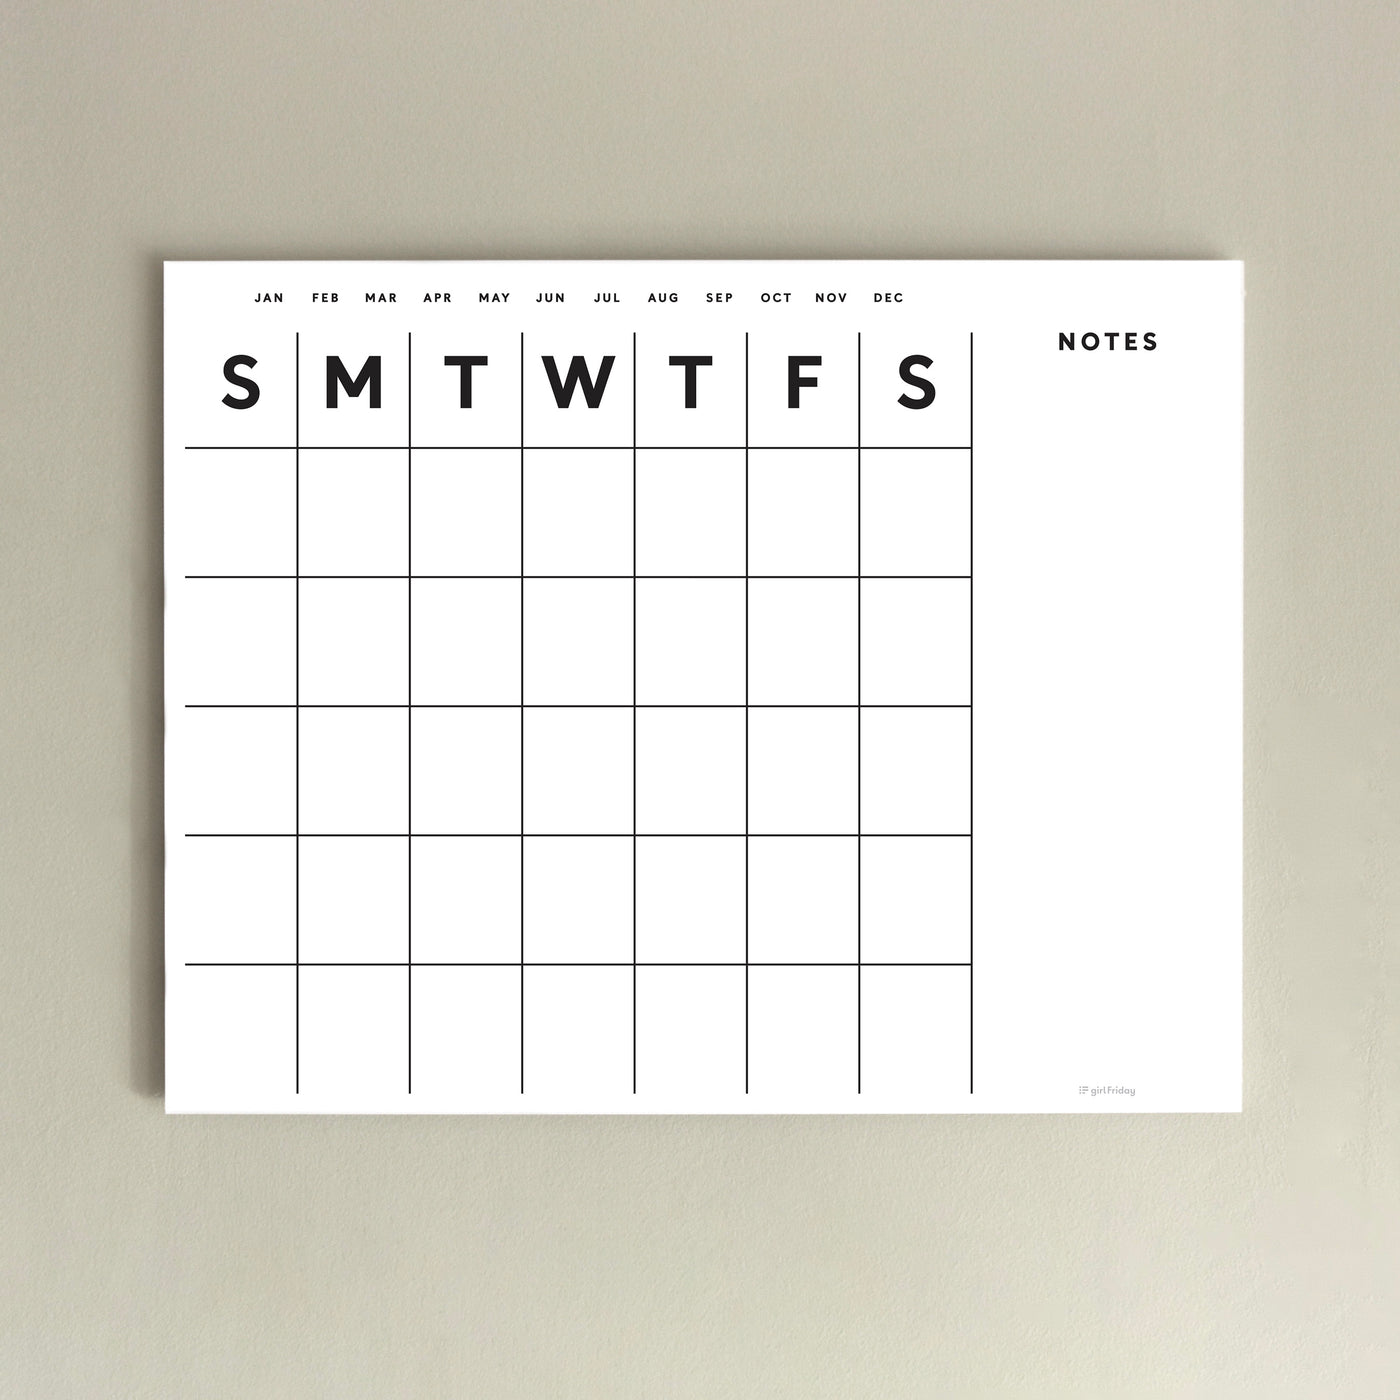 Dry erase calendar for non-magnetic fridge or DORM room - Acrylic calendar with optional magnetic surface